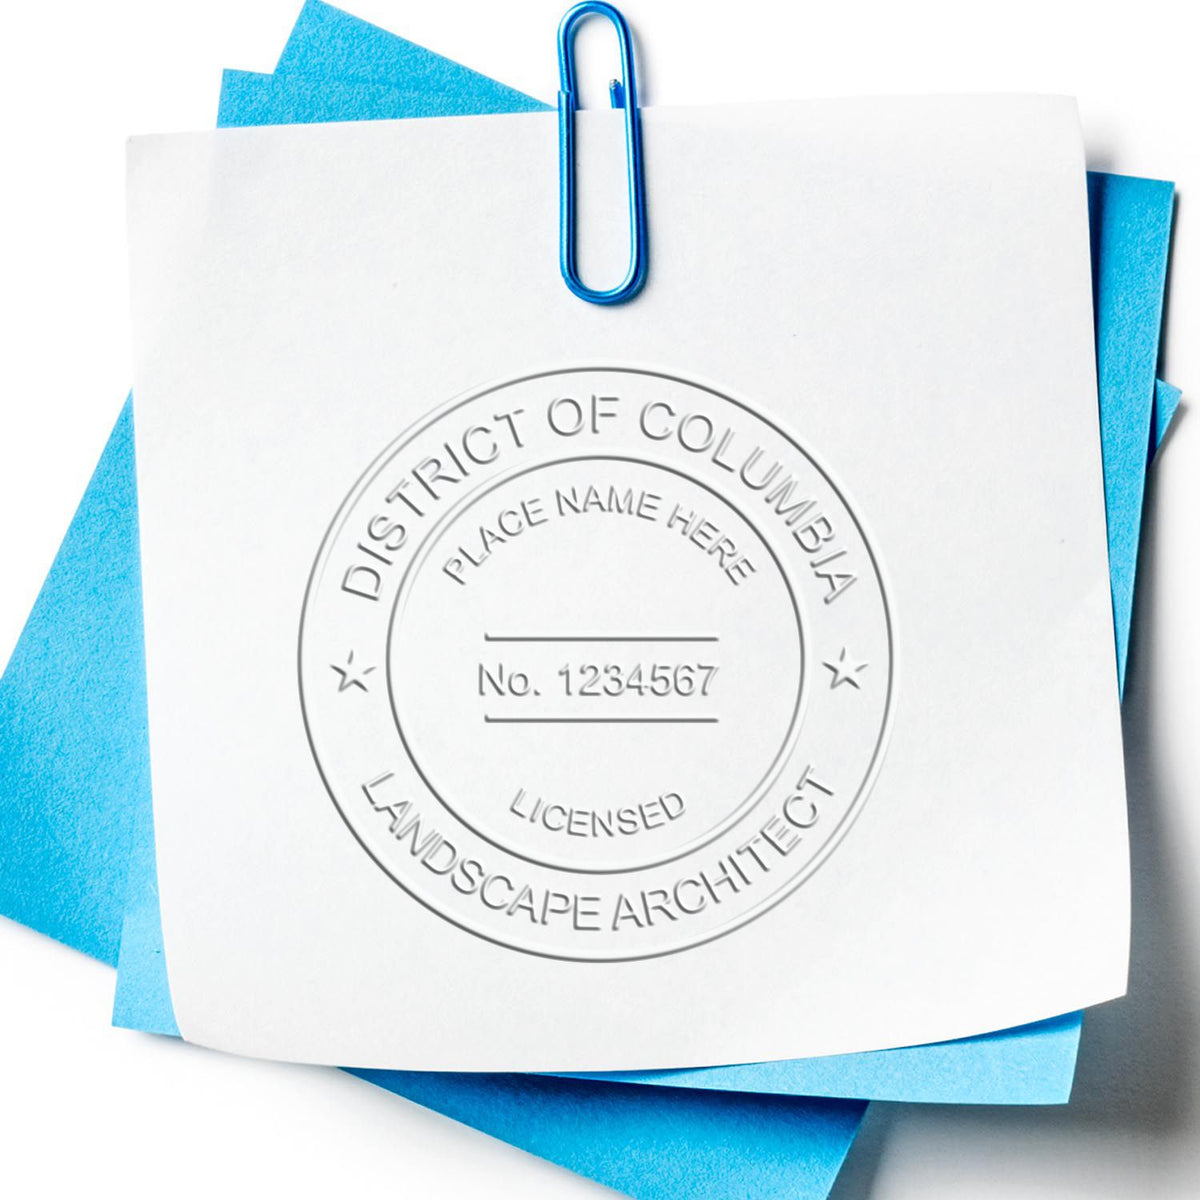 An in use photo of the Hybrid Delaware Landscape Architect Seal showing a sample imprint on a cardstock